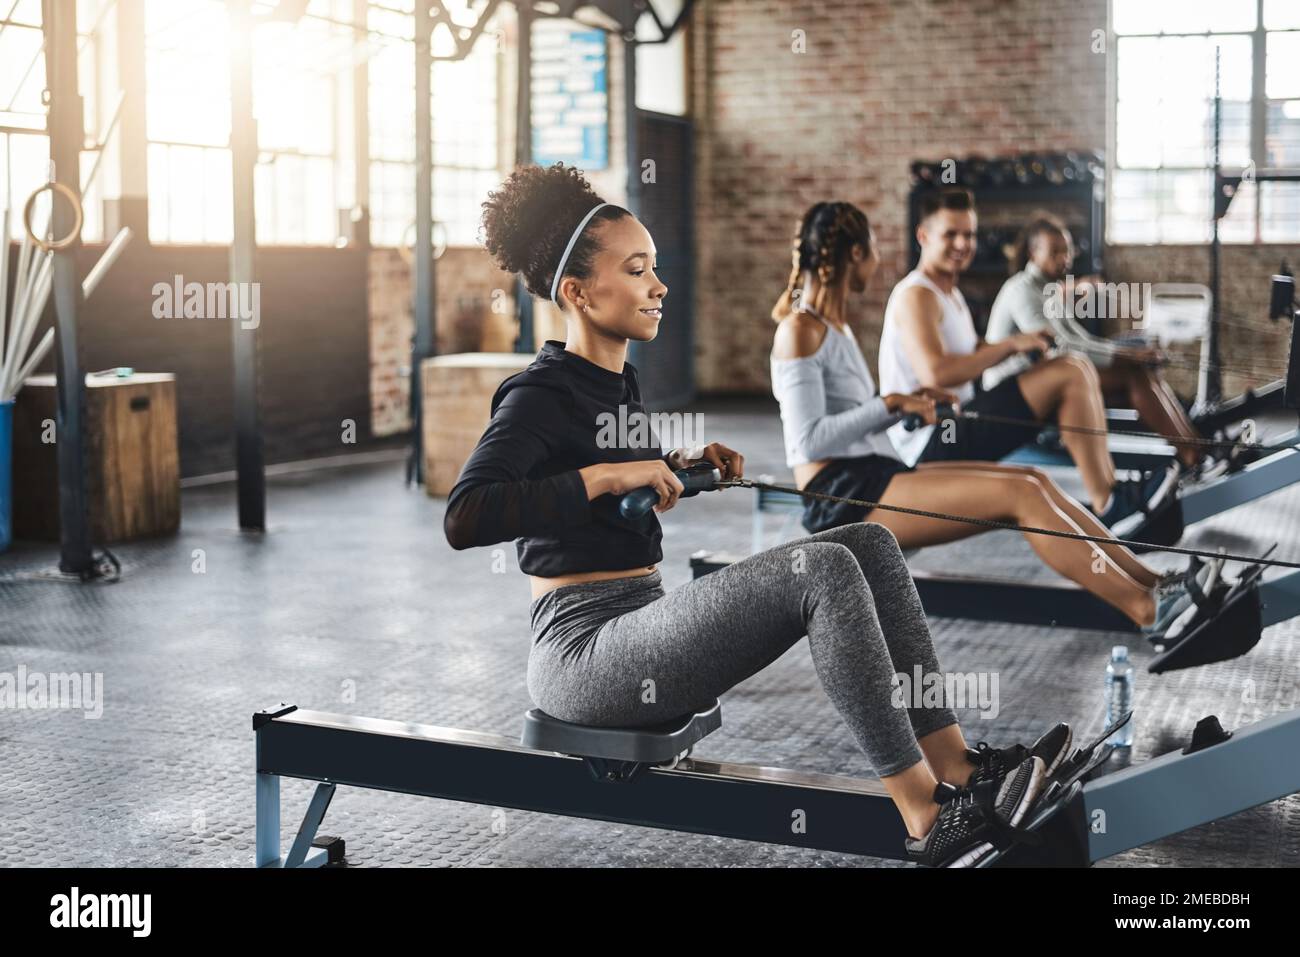 Rowing their way right towards their fitness goals. a young woman working out with a rowing machine in the gym. Stock Photo